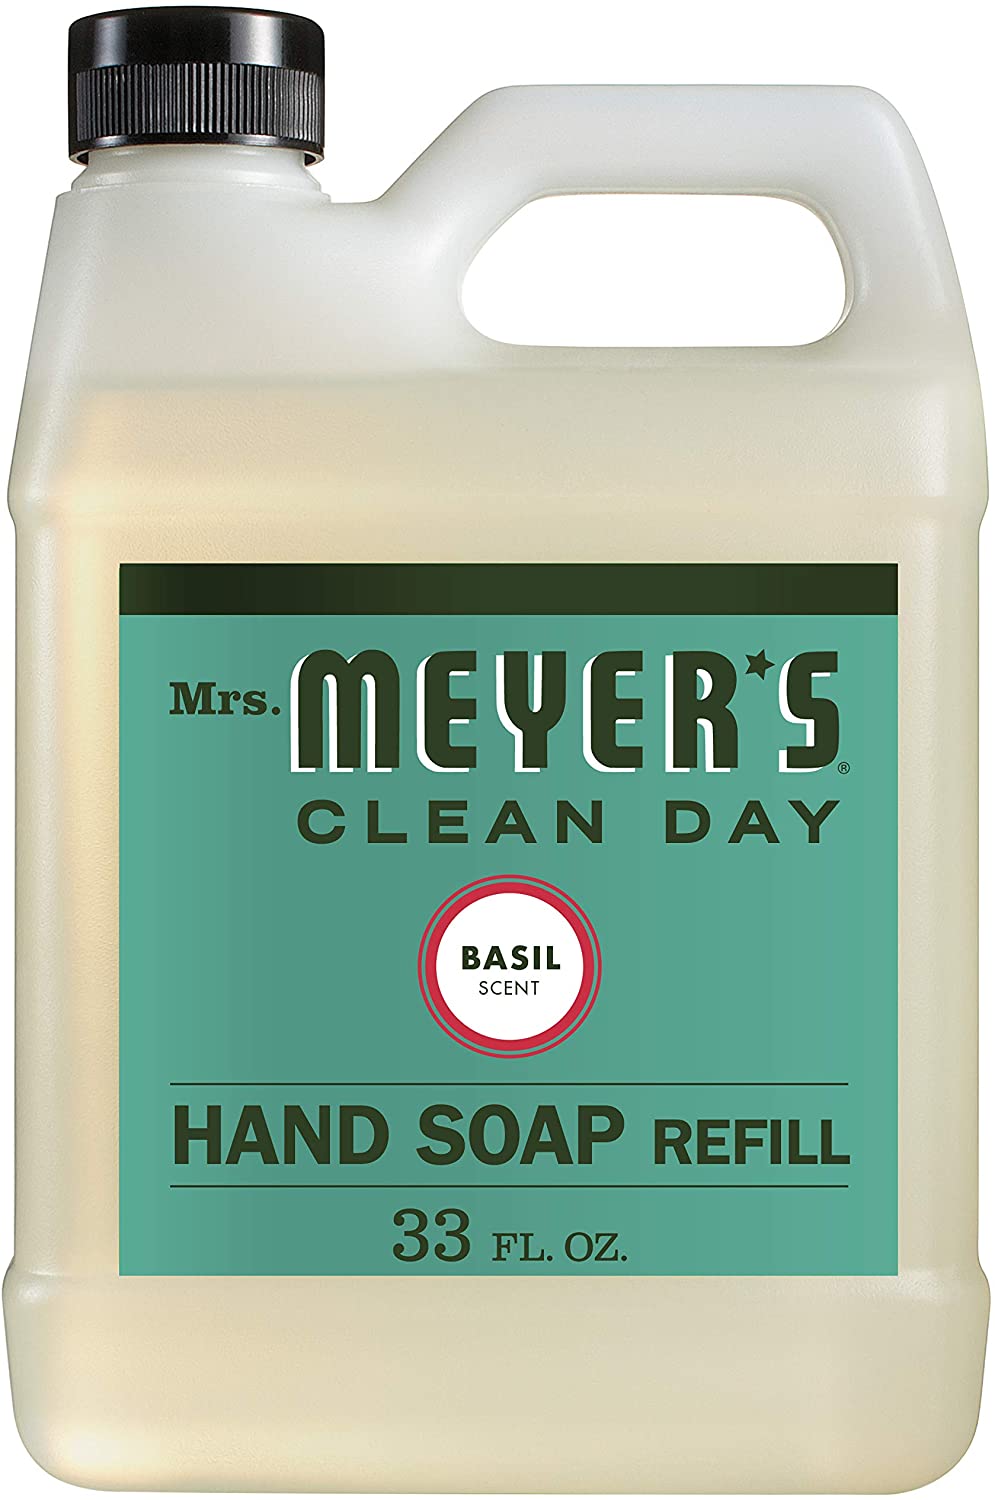 33-Oz Mrs. Meyer's Clean Day Liquid Hand Soap Refill (Basil) $4.89 w/ S&S + Free Shipping w/ Prime or on $25+